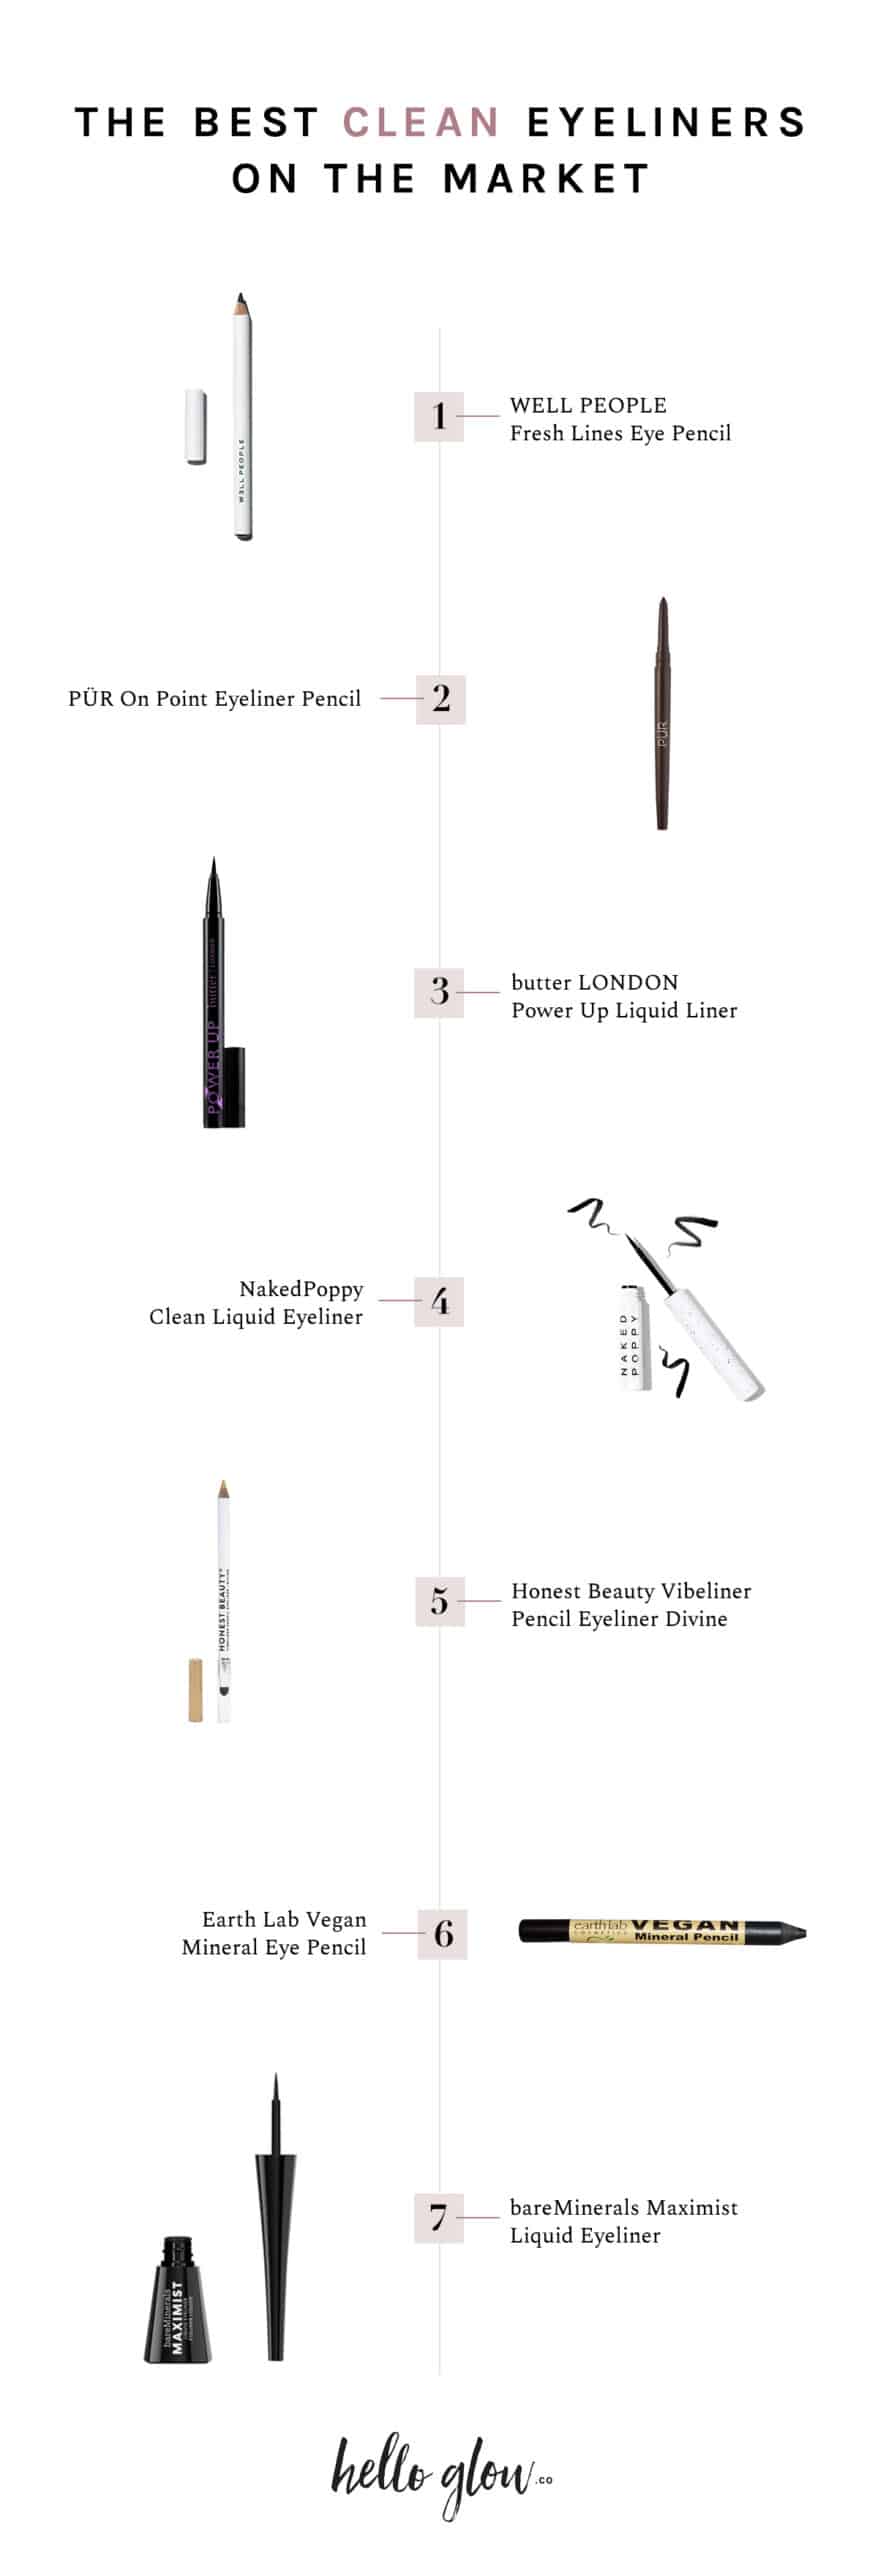 The best clean eyeliners on the market